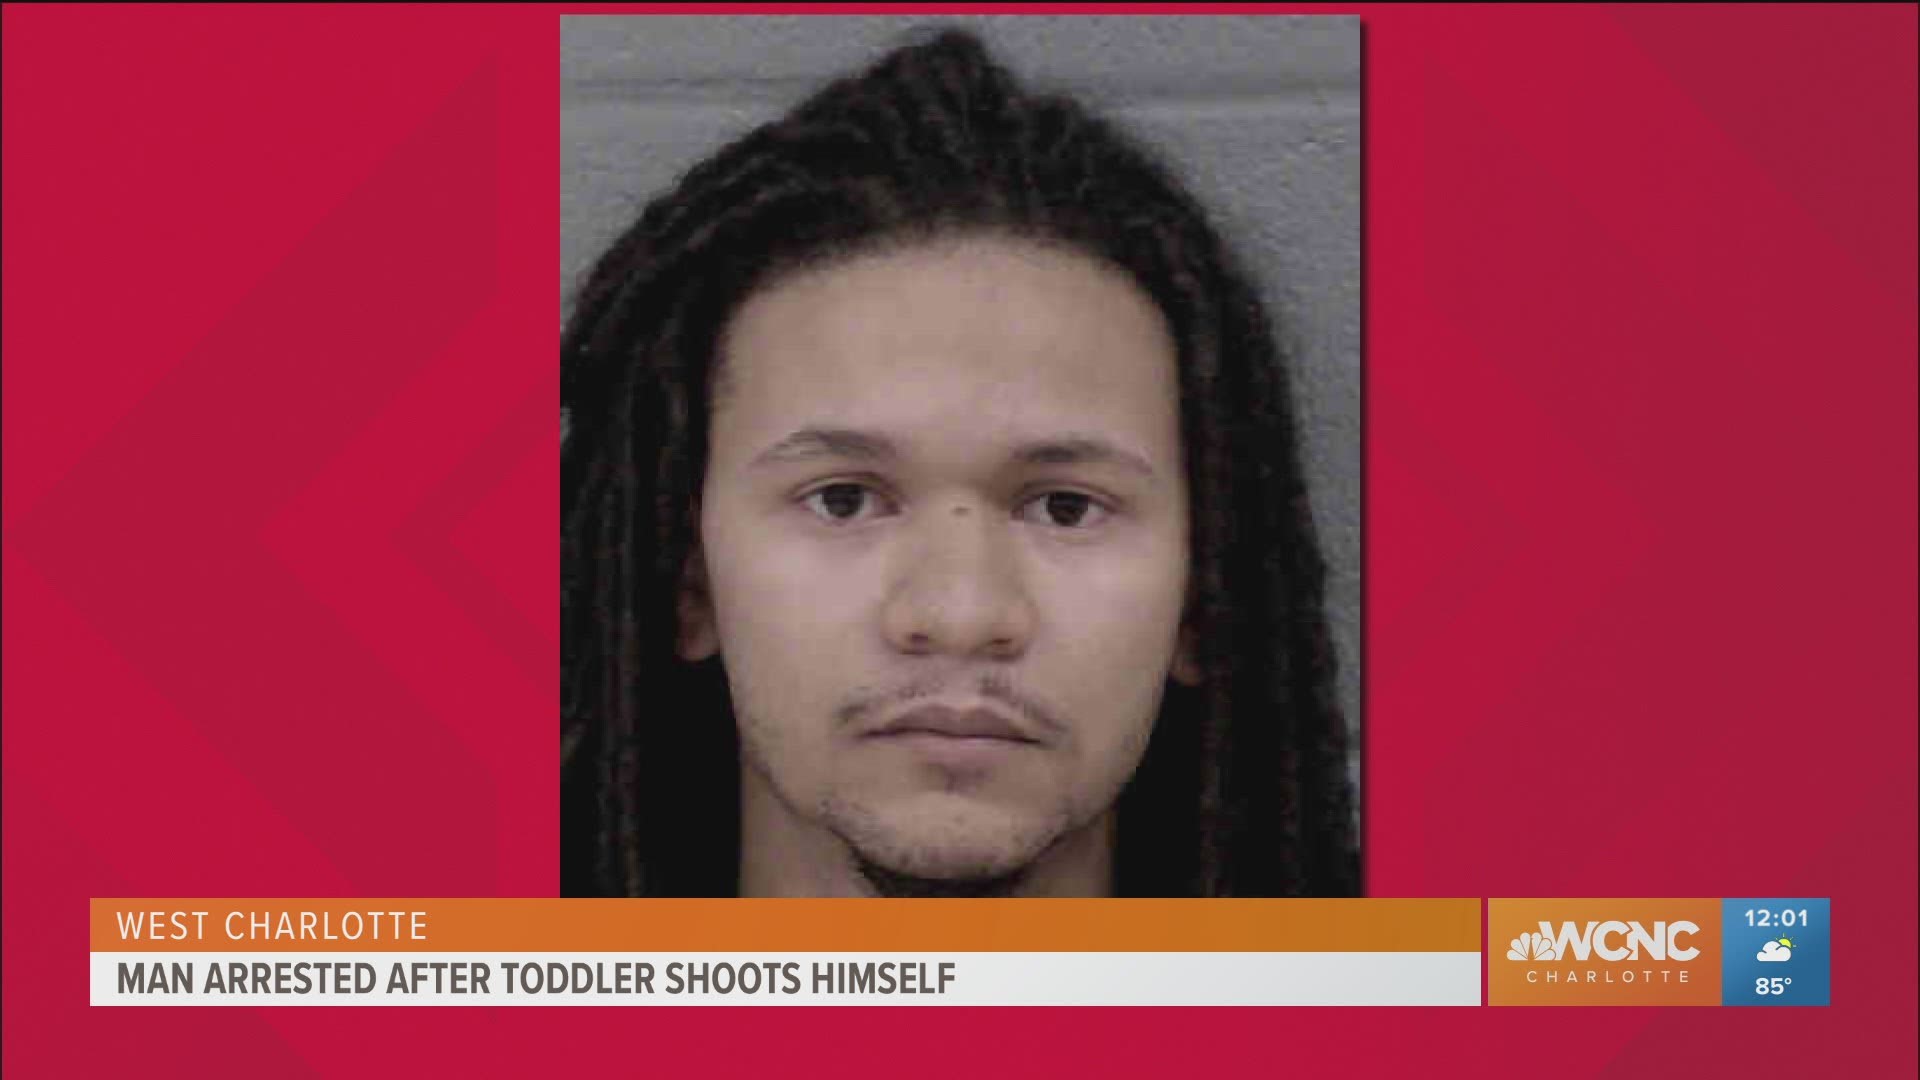 One person was arrested after a 2-year-old was shot in west Charlotte Wednesday.